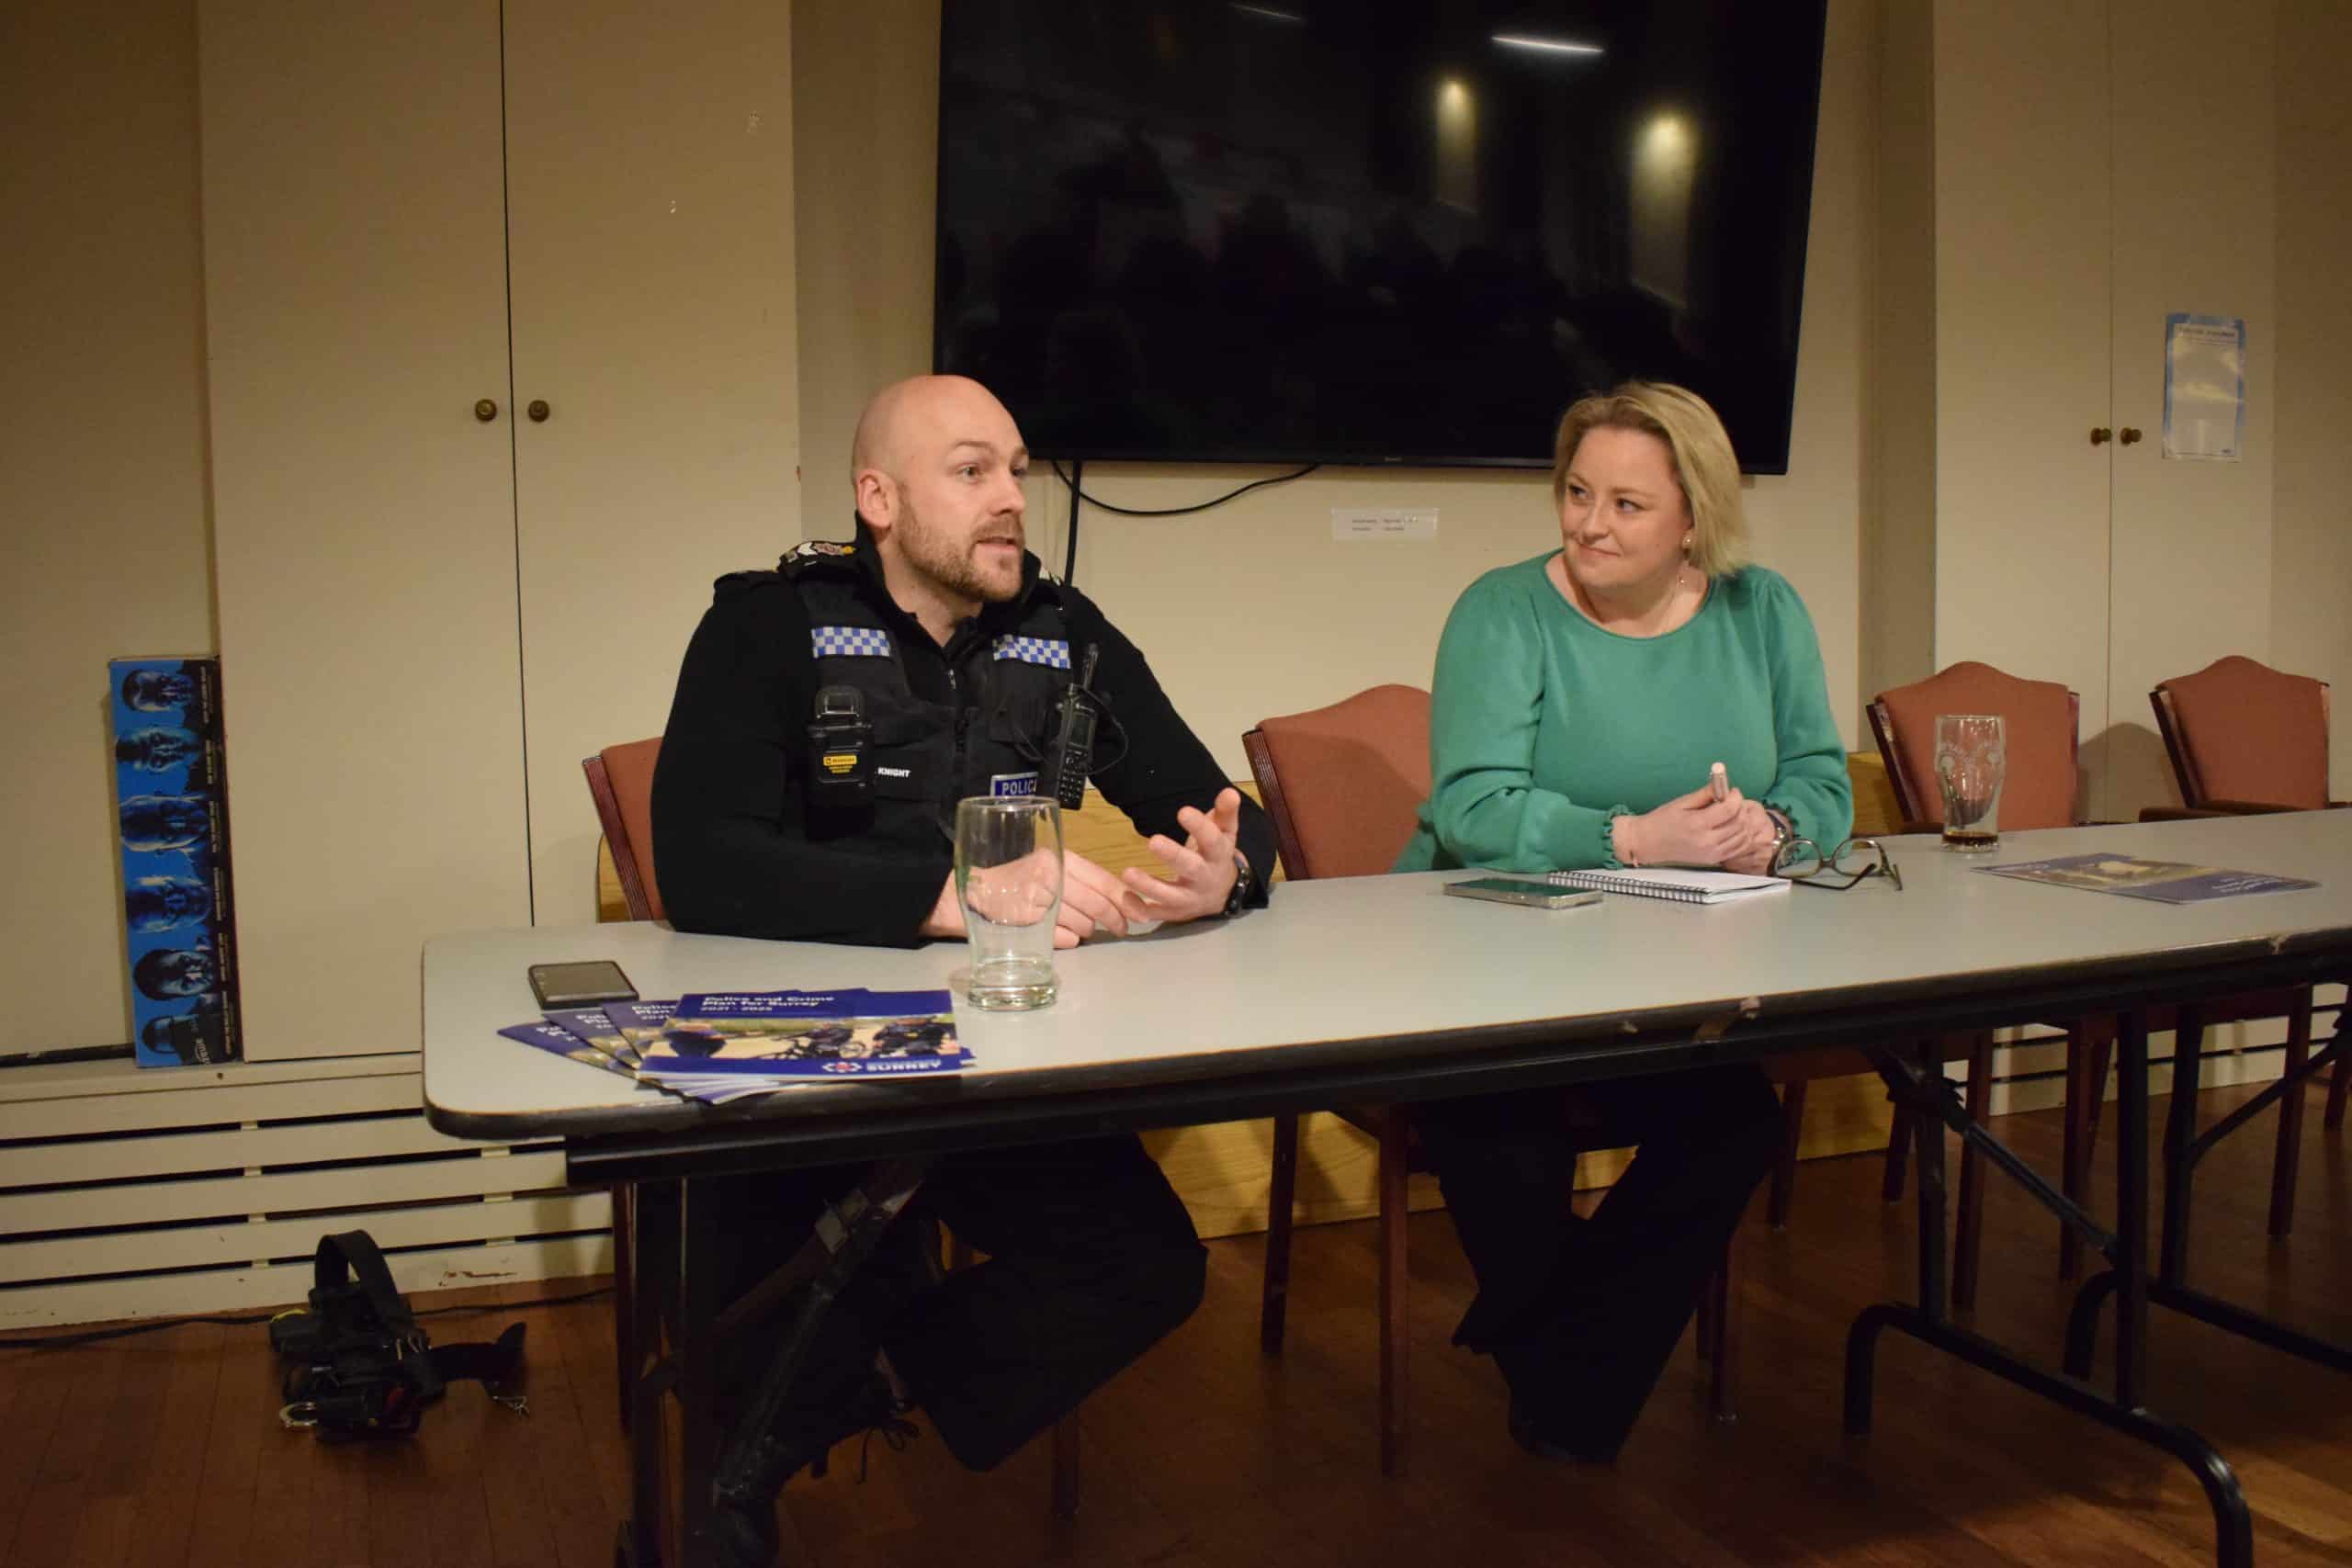 Police and Crime Commissioner Lisa Townsend sat at a desk with local police officer in a town hall